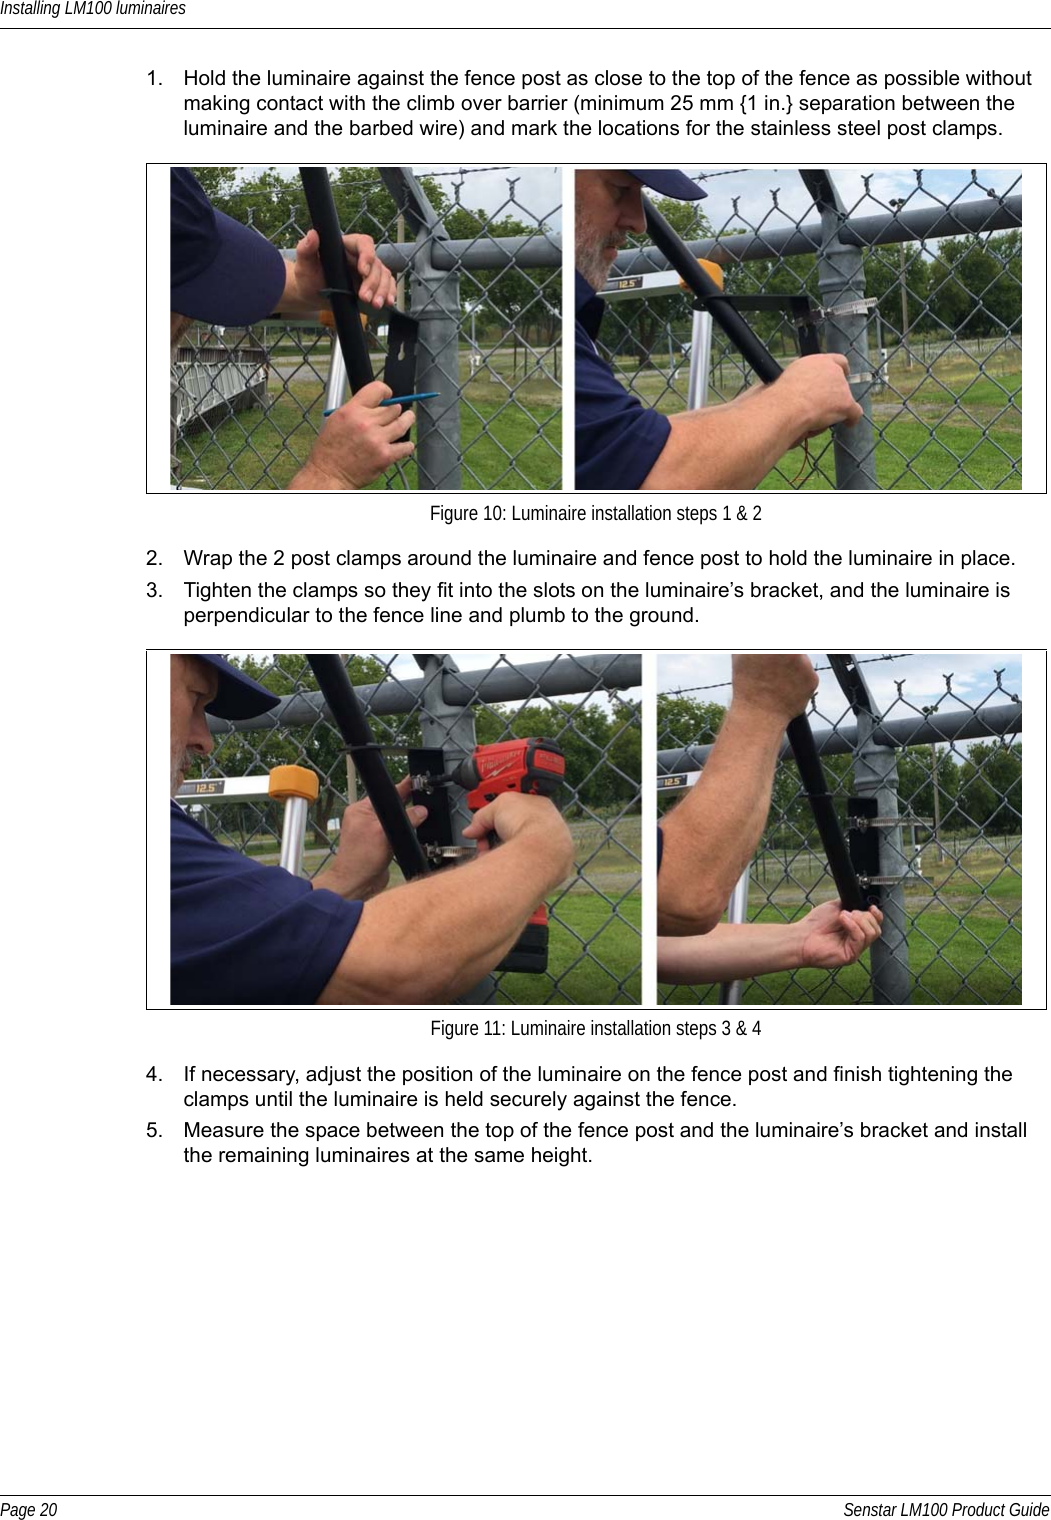 Installing LM100 luminairesPage 20 Senstar LM100 Product Guide1. Hold the luminaire against the fence post as close to the top of the fence as possible without making contact with the climb over barrier (minimum 25 mm {1 in.} separation between the luminaire and the barbed wire) and mark the locations for the stainless steel post clamps.2. Wrap the 2 post clamps around the luminaire and fence post to hold the luminaire in place.3. Tighten the clamps so they fit into the slots on the luminaire’s bracket, and the luminaire is perpendicular to the fence line and plumb to the ground.4. If necessary, adjust the position of the luminaire on the fence post and finish tightening the clamps until the luminaire is held securely against the fence.5. Measure the space between the top of the fence post and the luminaire’s bracket and install the remaining luminaires at the same height.  Figure 10: Luminaire installation steps 1 &amp; 2Figure 11: Luminaire installation steps 3 &amp; 4